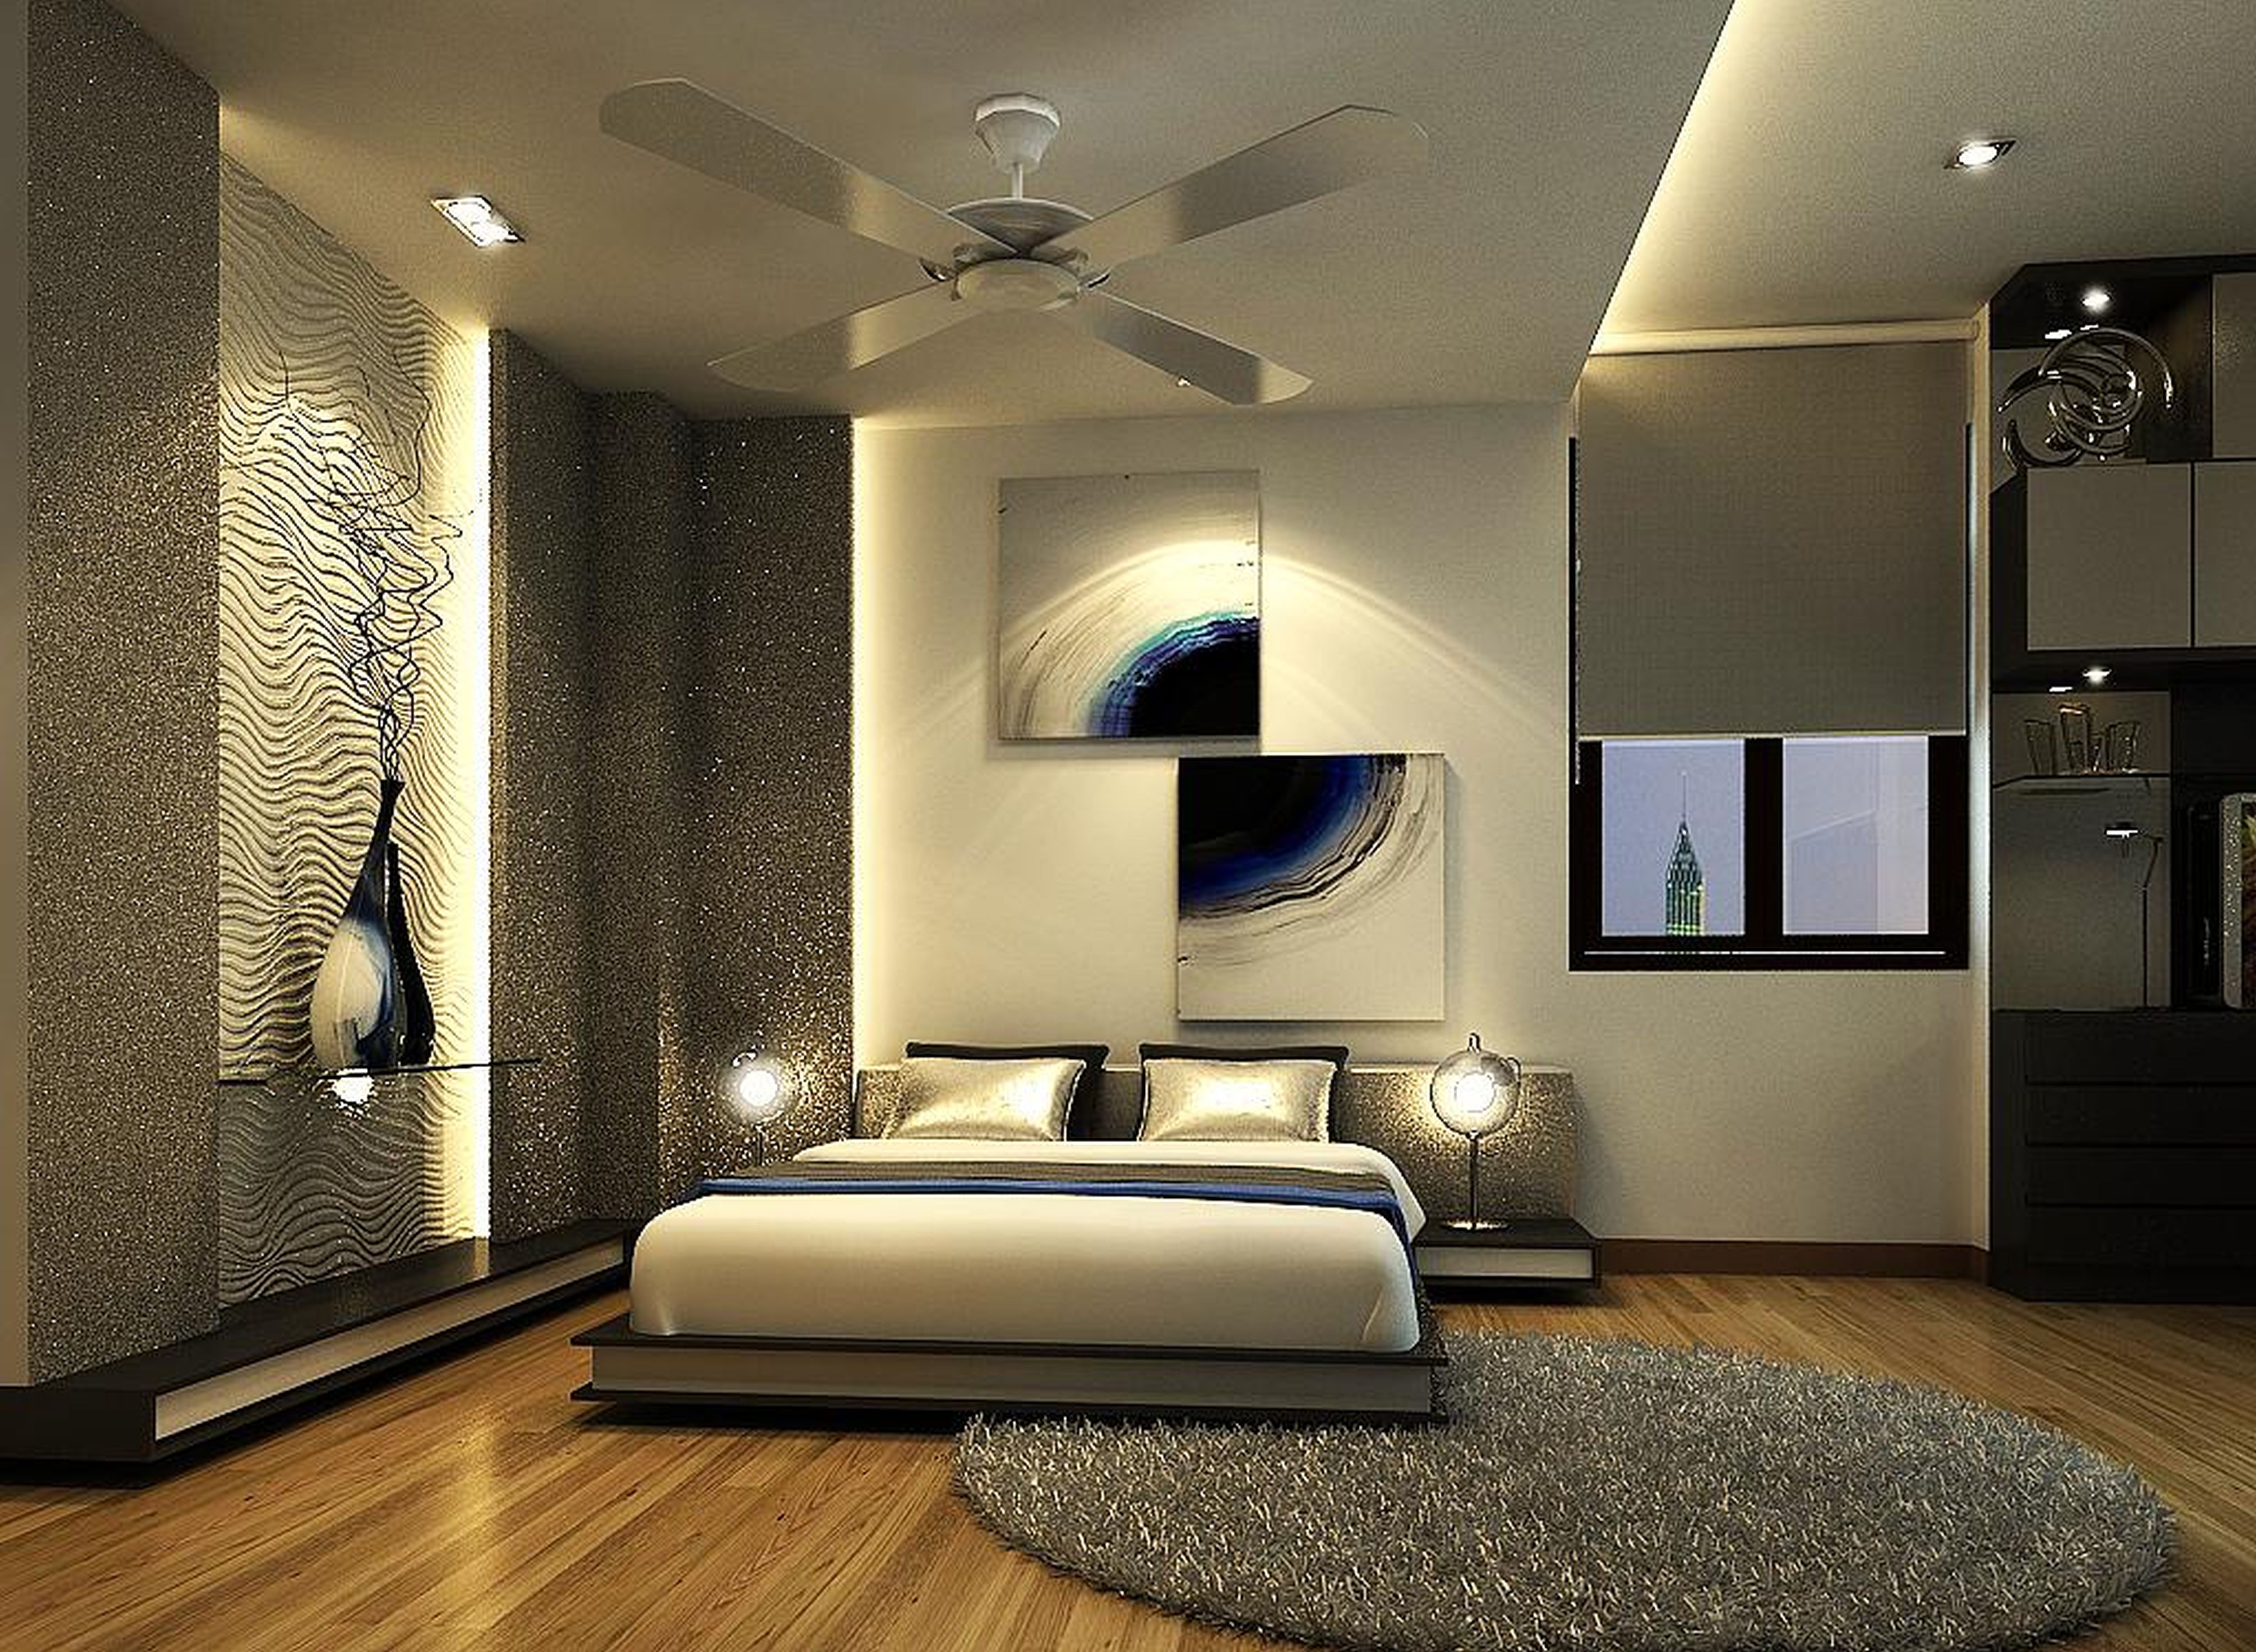 Planned Single Room Ideas That Will Capture That Ideal Bedroom